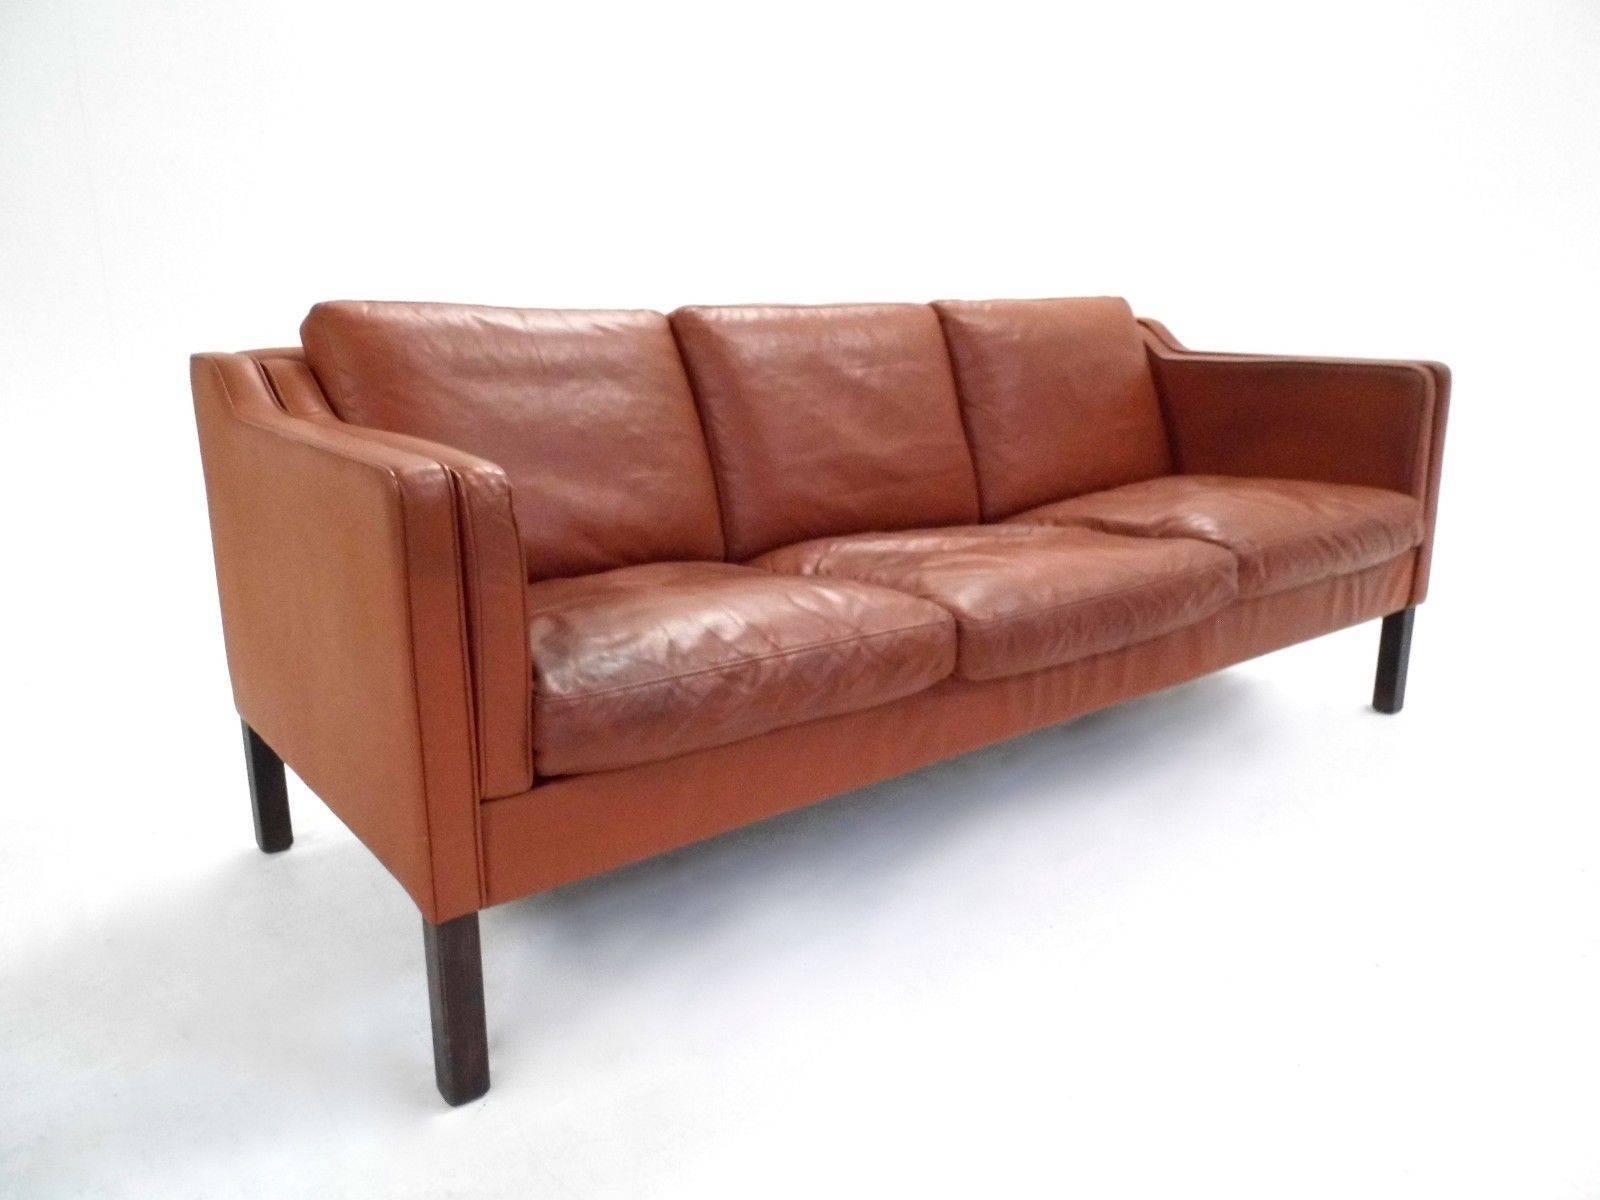 A beautiful Danish tan brown leather three-seat sofa, this would make a stylish addition to any living or work area. The sofa has wide cushions and sculptured padded armrests for enhanced comfort. A striking piece of classic Scandinavian